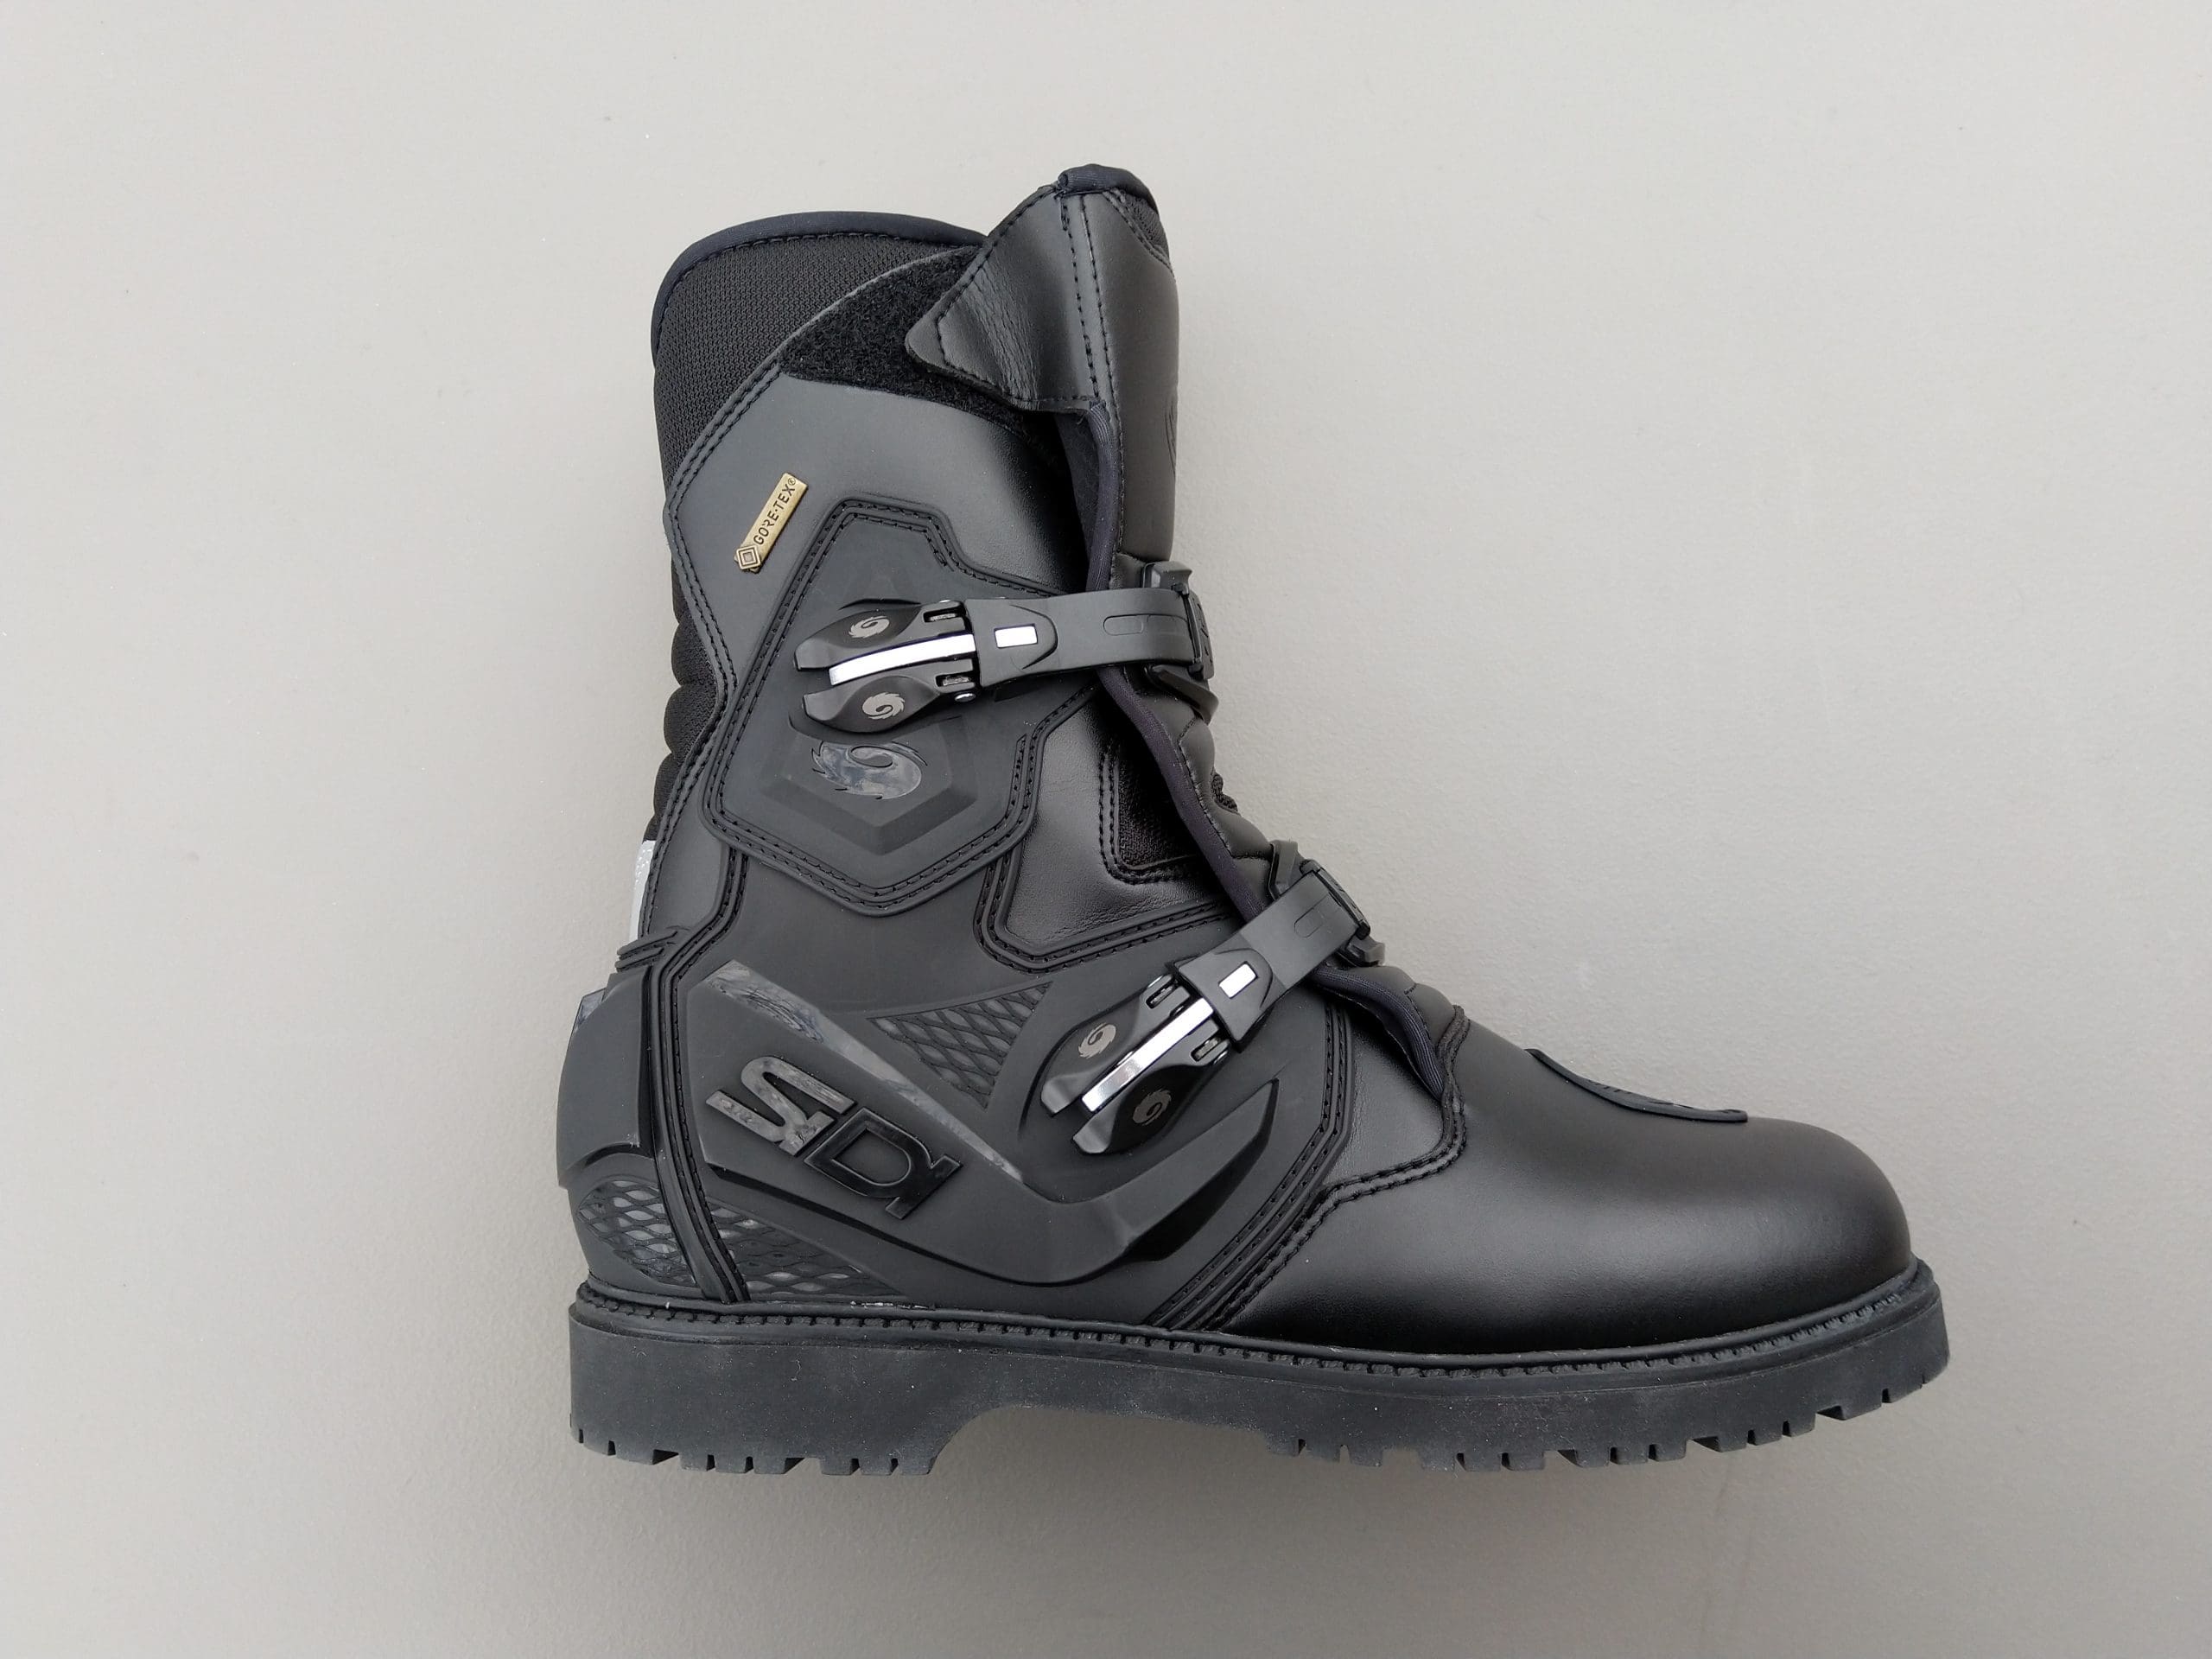 most protective motorcycle boots